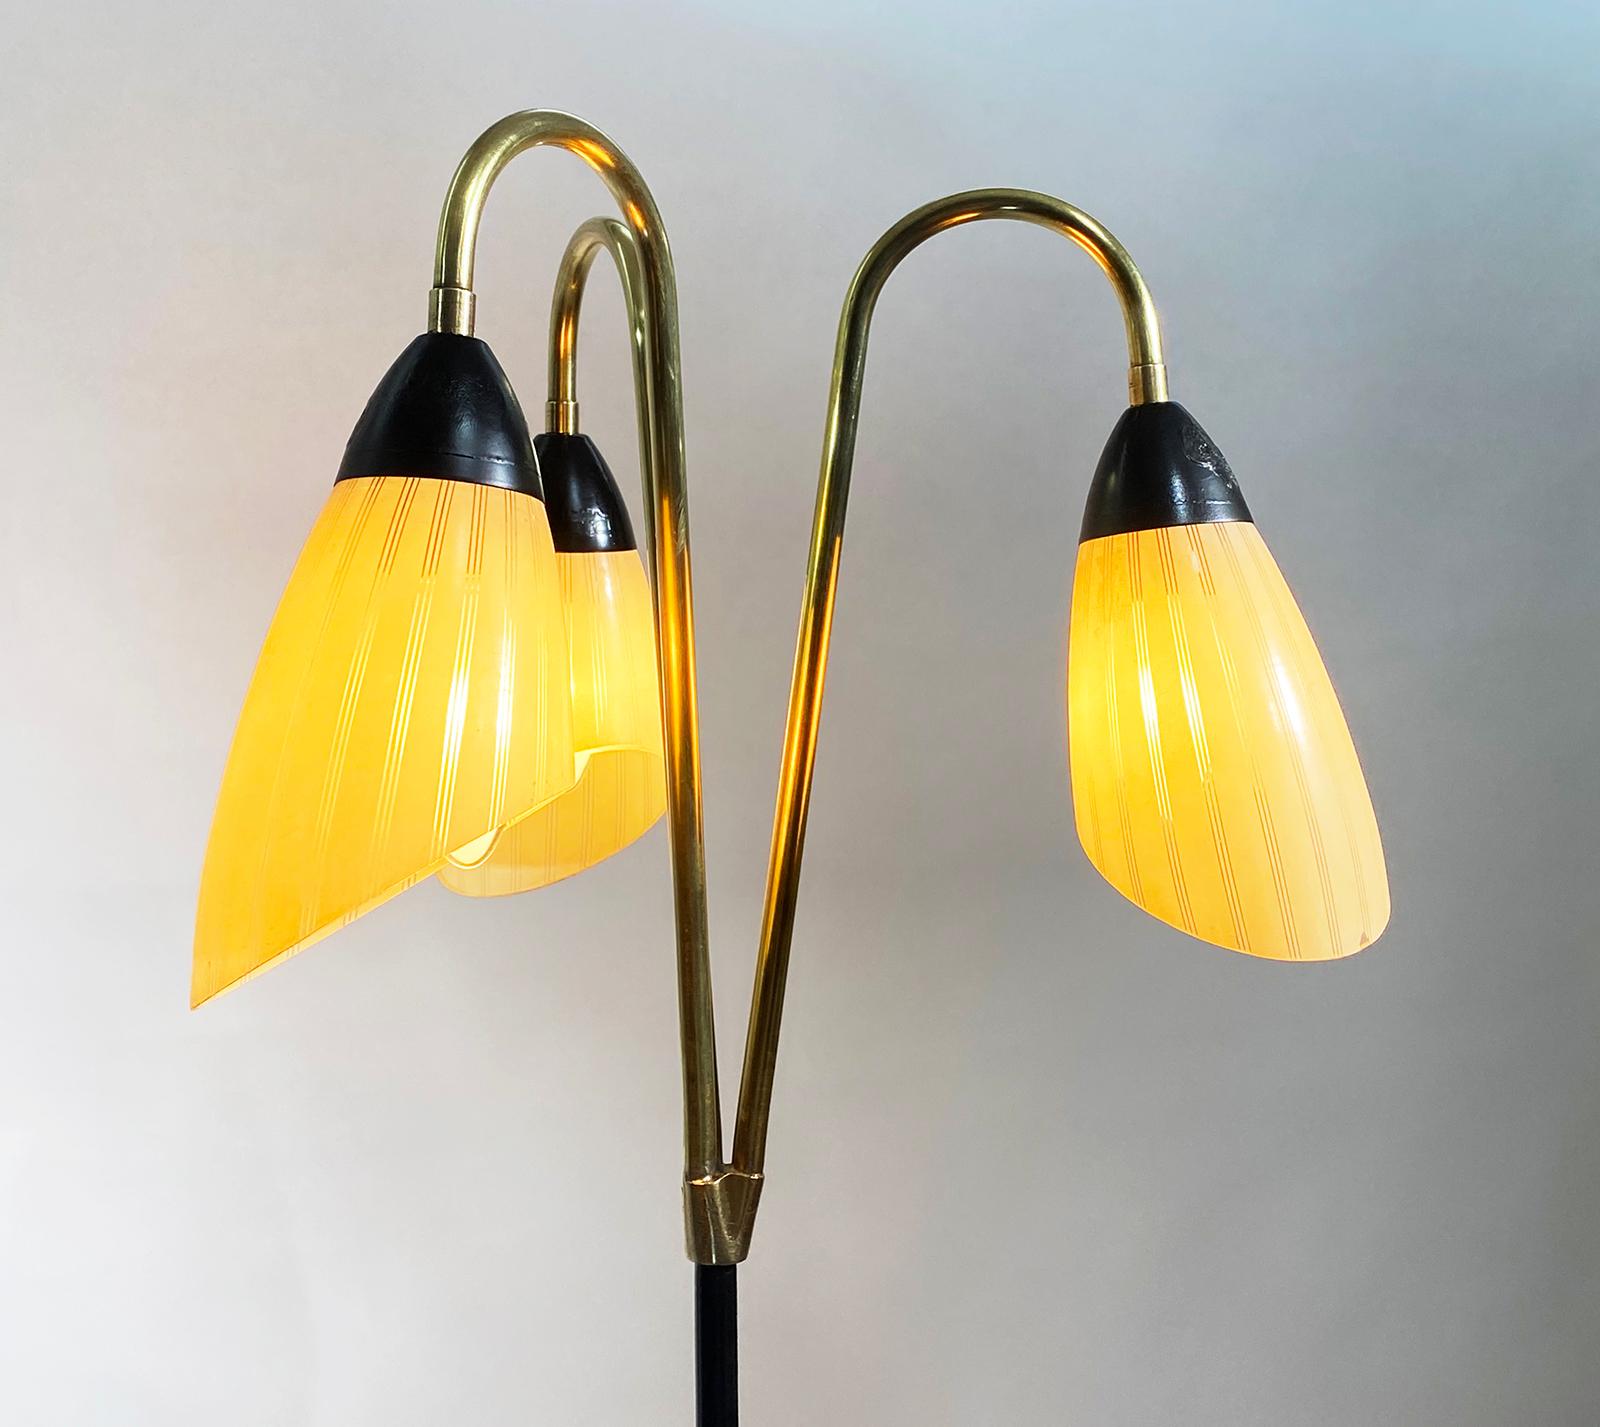 20th Century French Brass and Black Metal Floor Lamp with 3 Glass Lights, 1950s For Sale